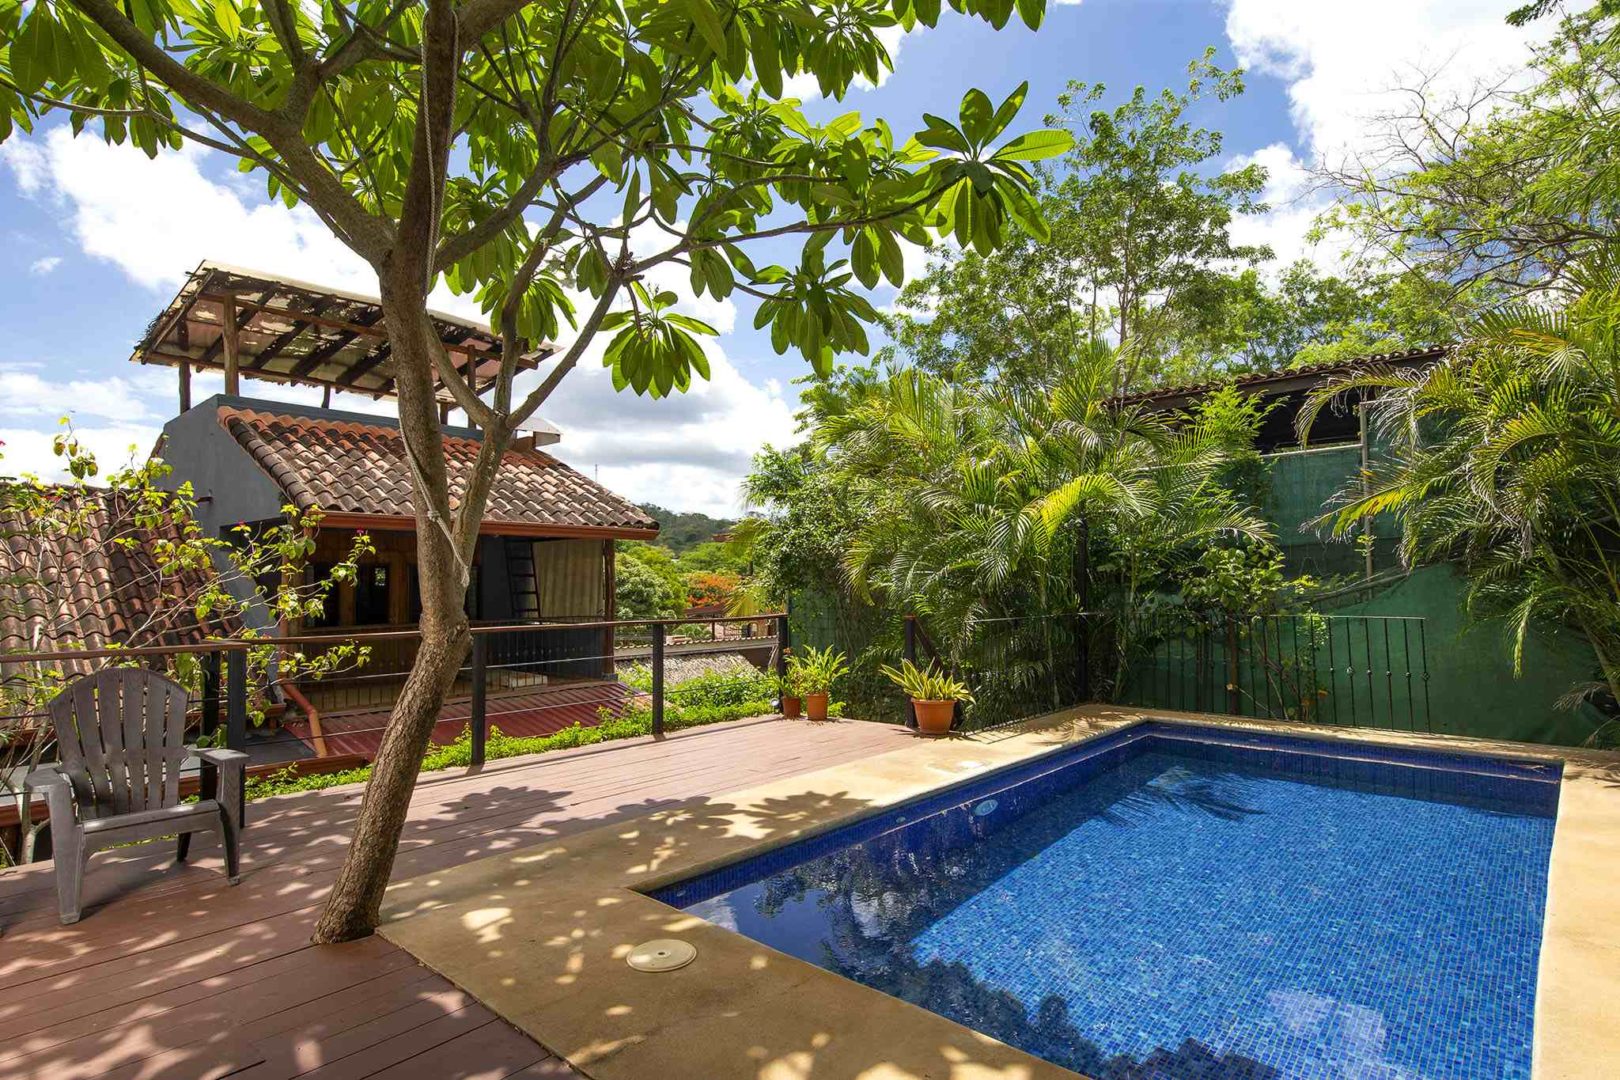 Family-friendly homes for sale Costa Rica selections